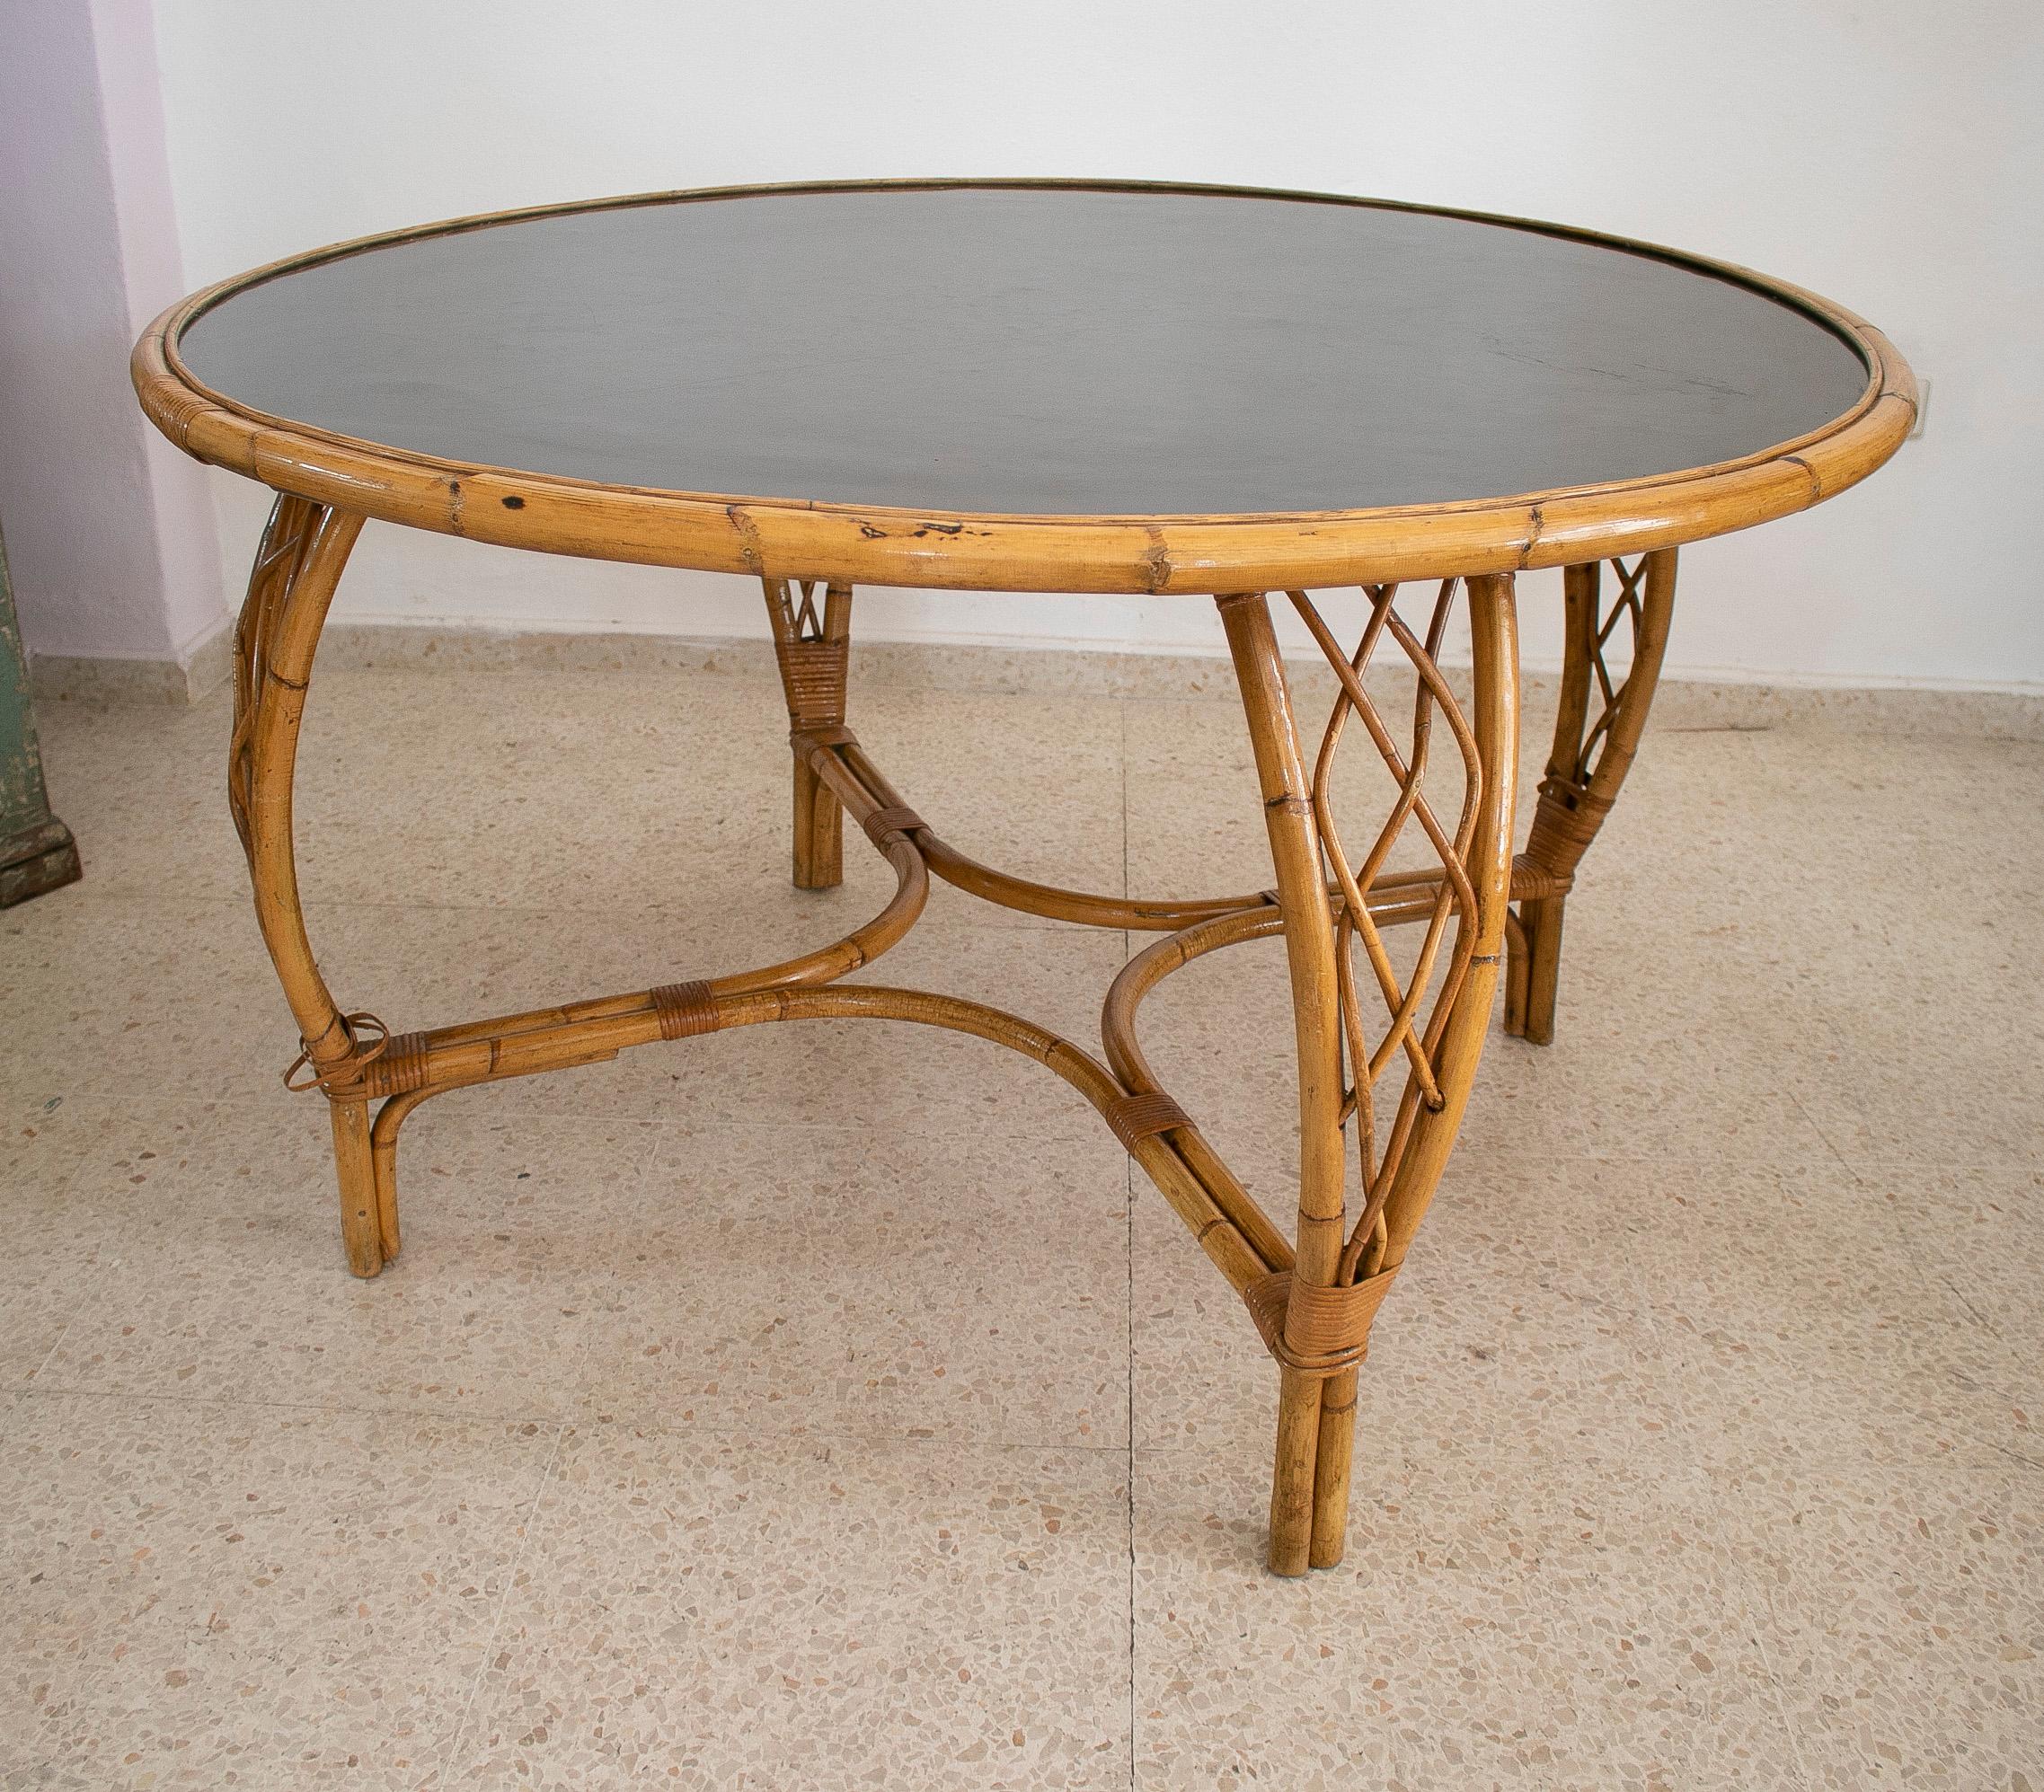 1970s Spanish Round Bamboo Table w/ Black Formica Top For Sale 1